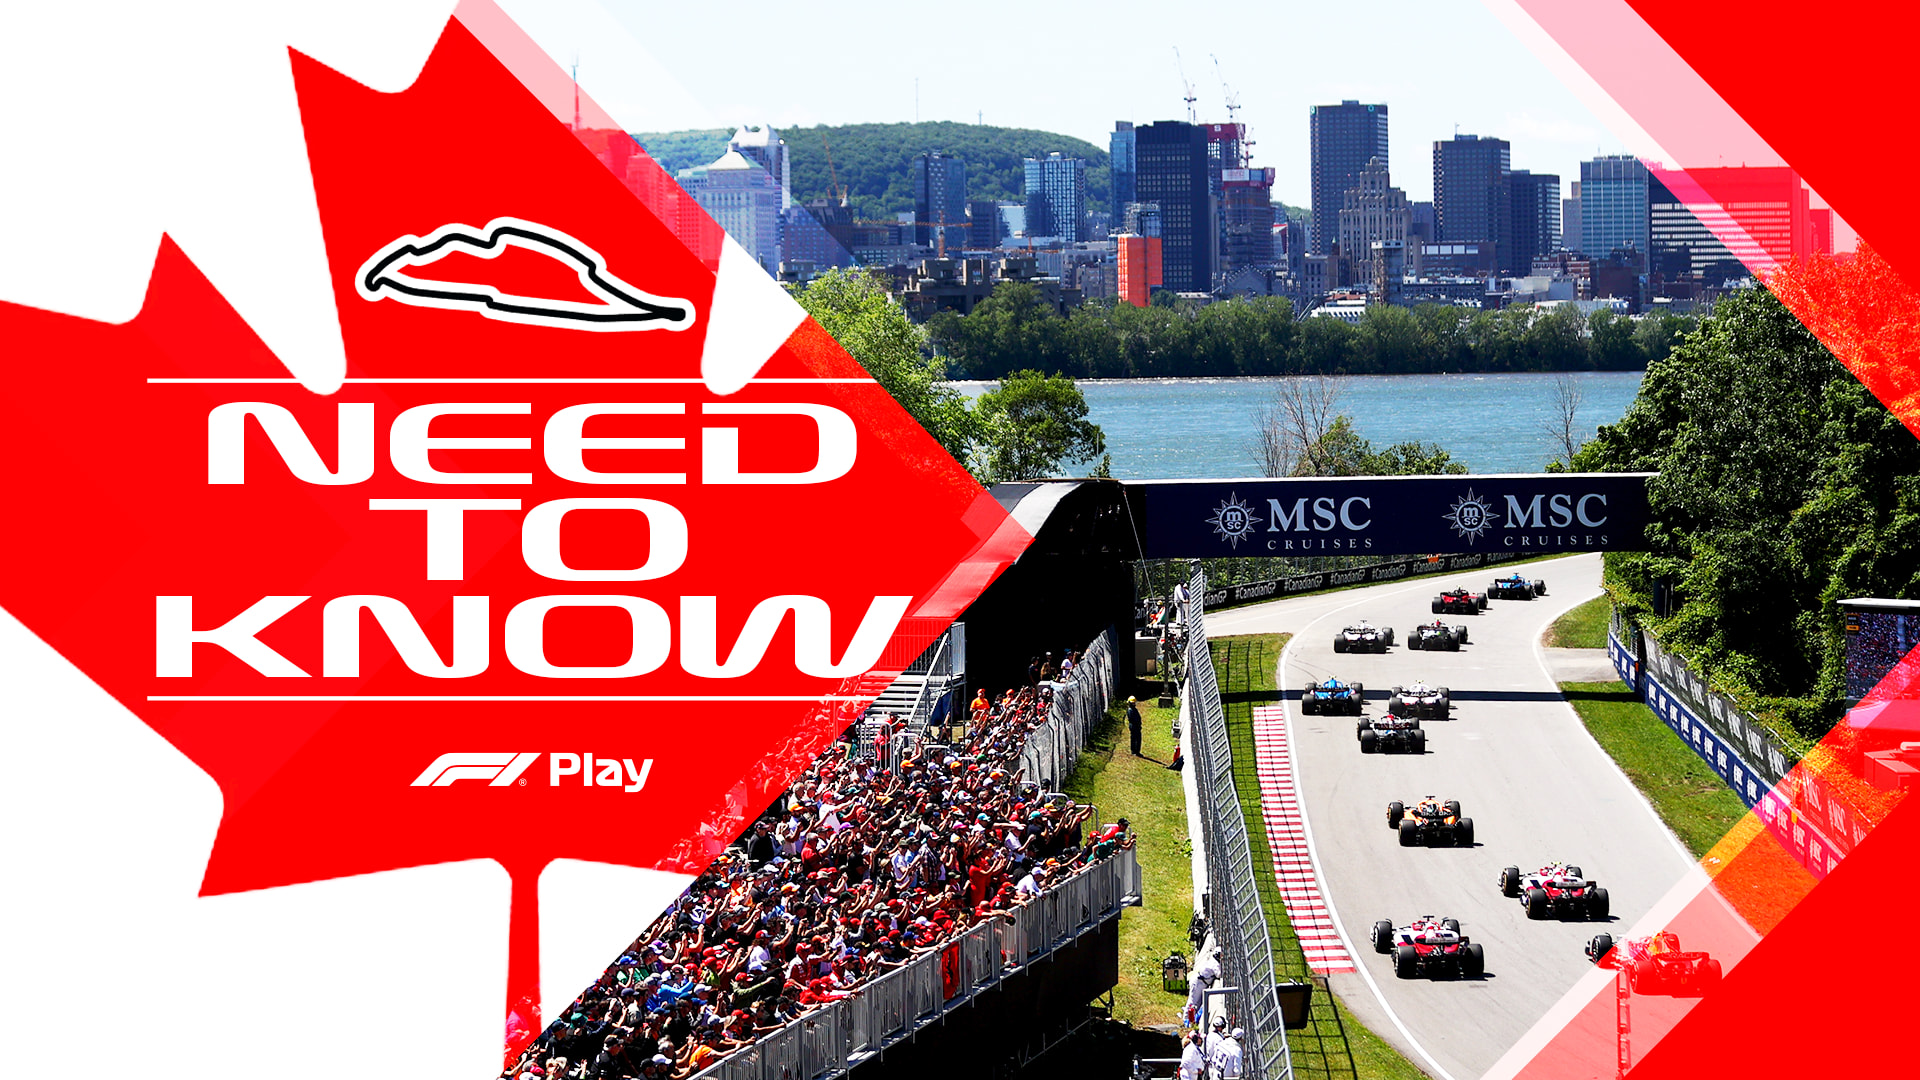 NEED TO KNOW The most important facts, stats and trivia ahead of the 2023 Canadian Grand Prix Formula 1®